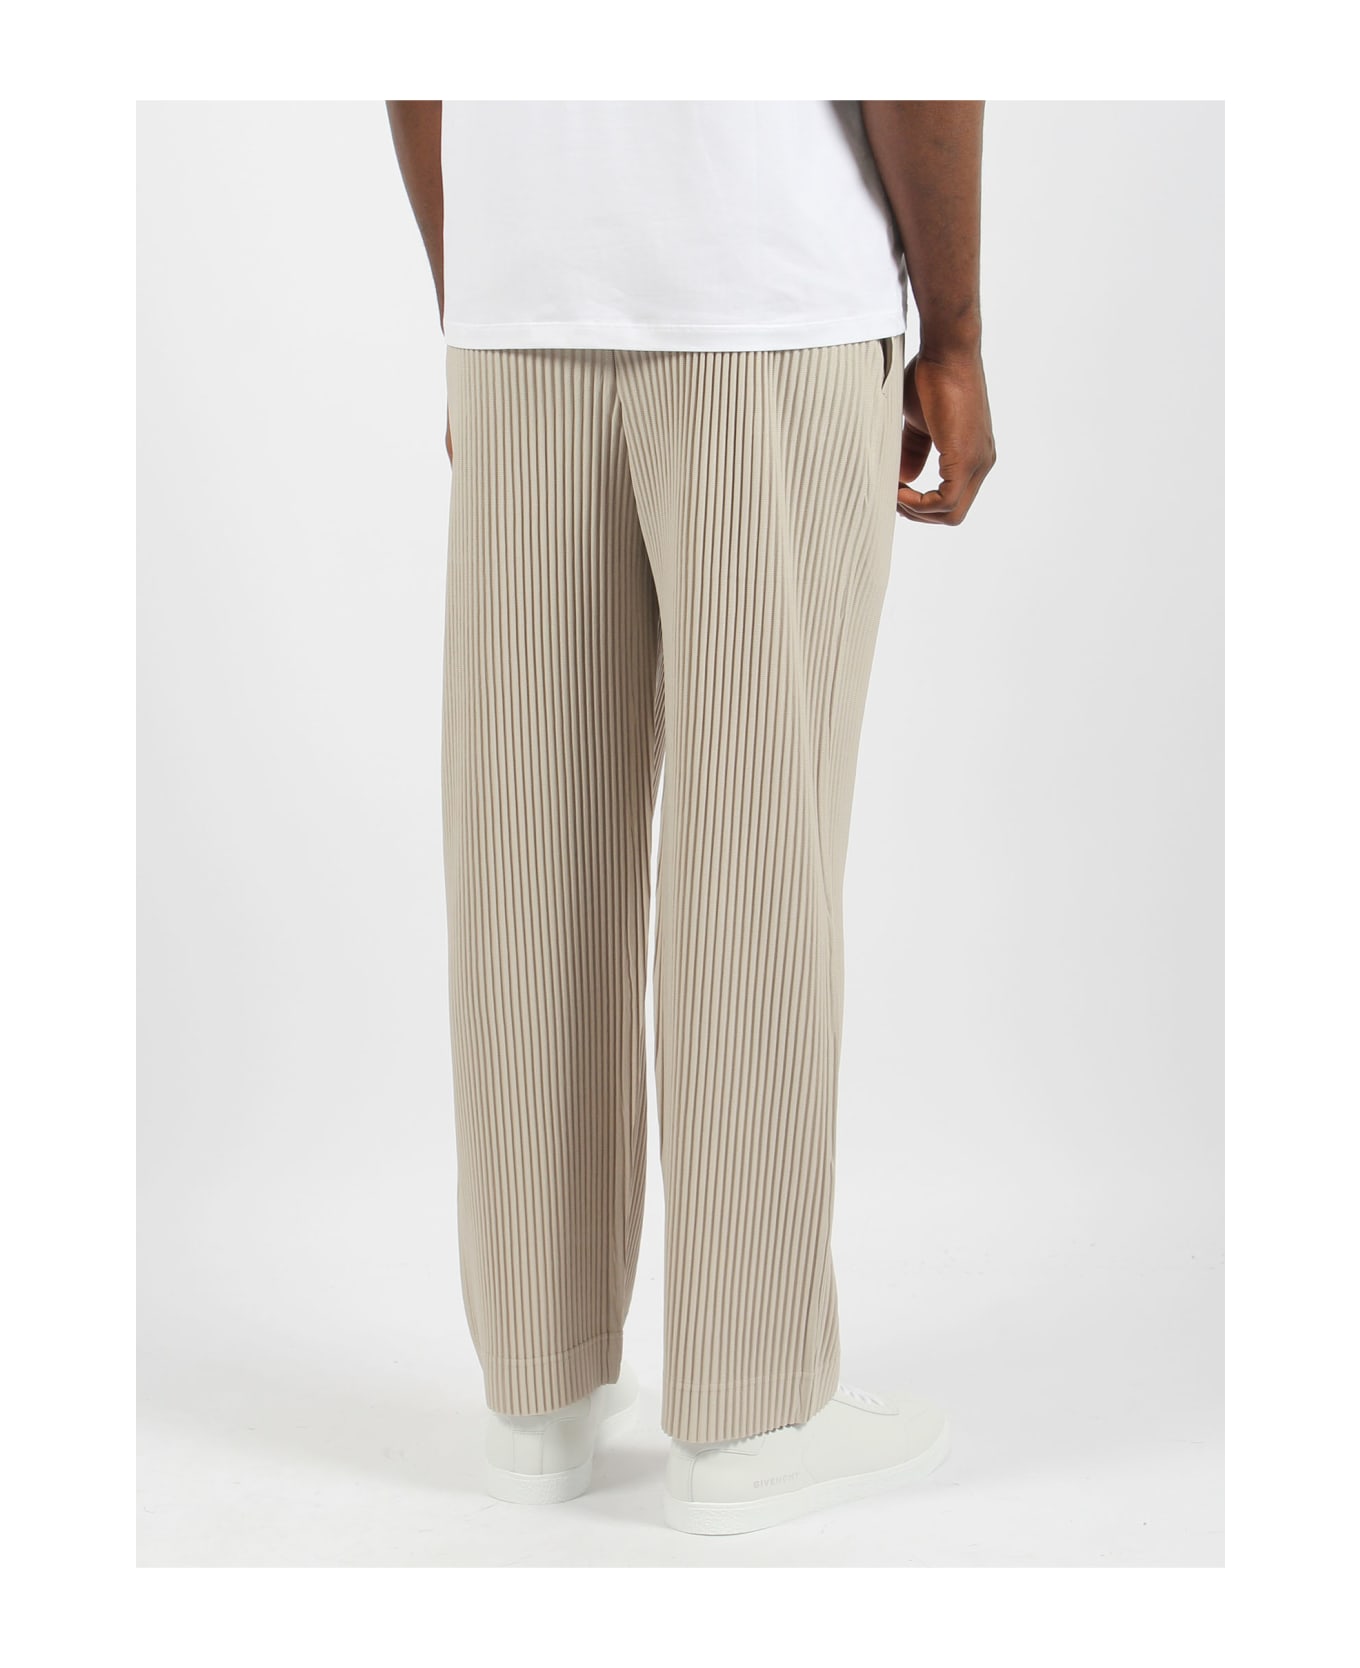 Homme Plissé Issey Miyake Mc March Trousers - Beige ボトムス